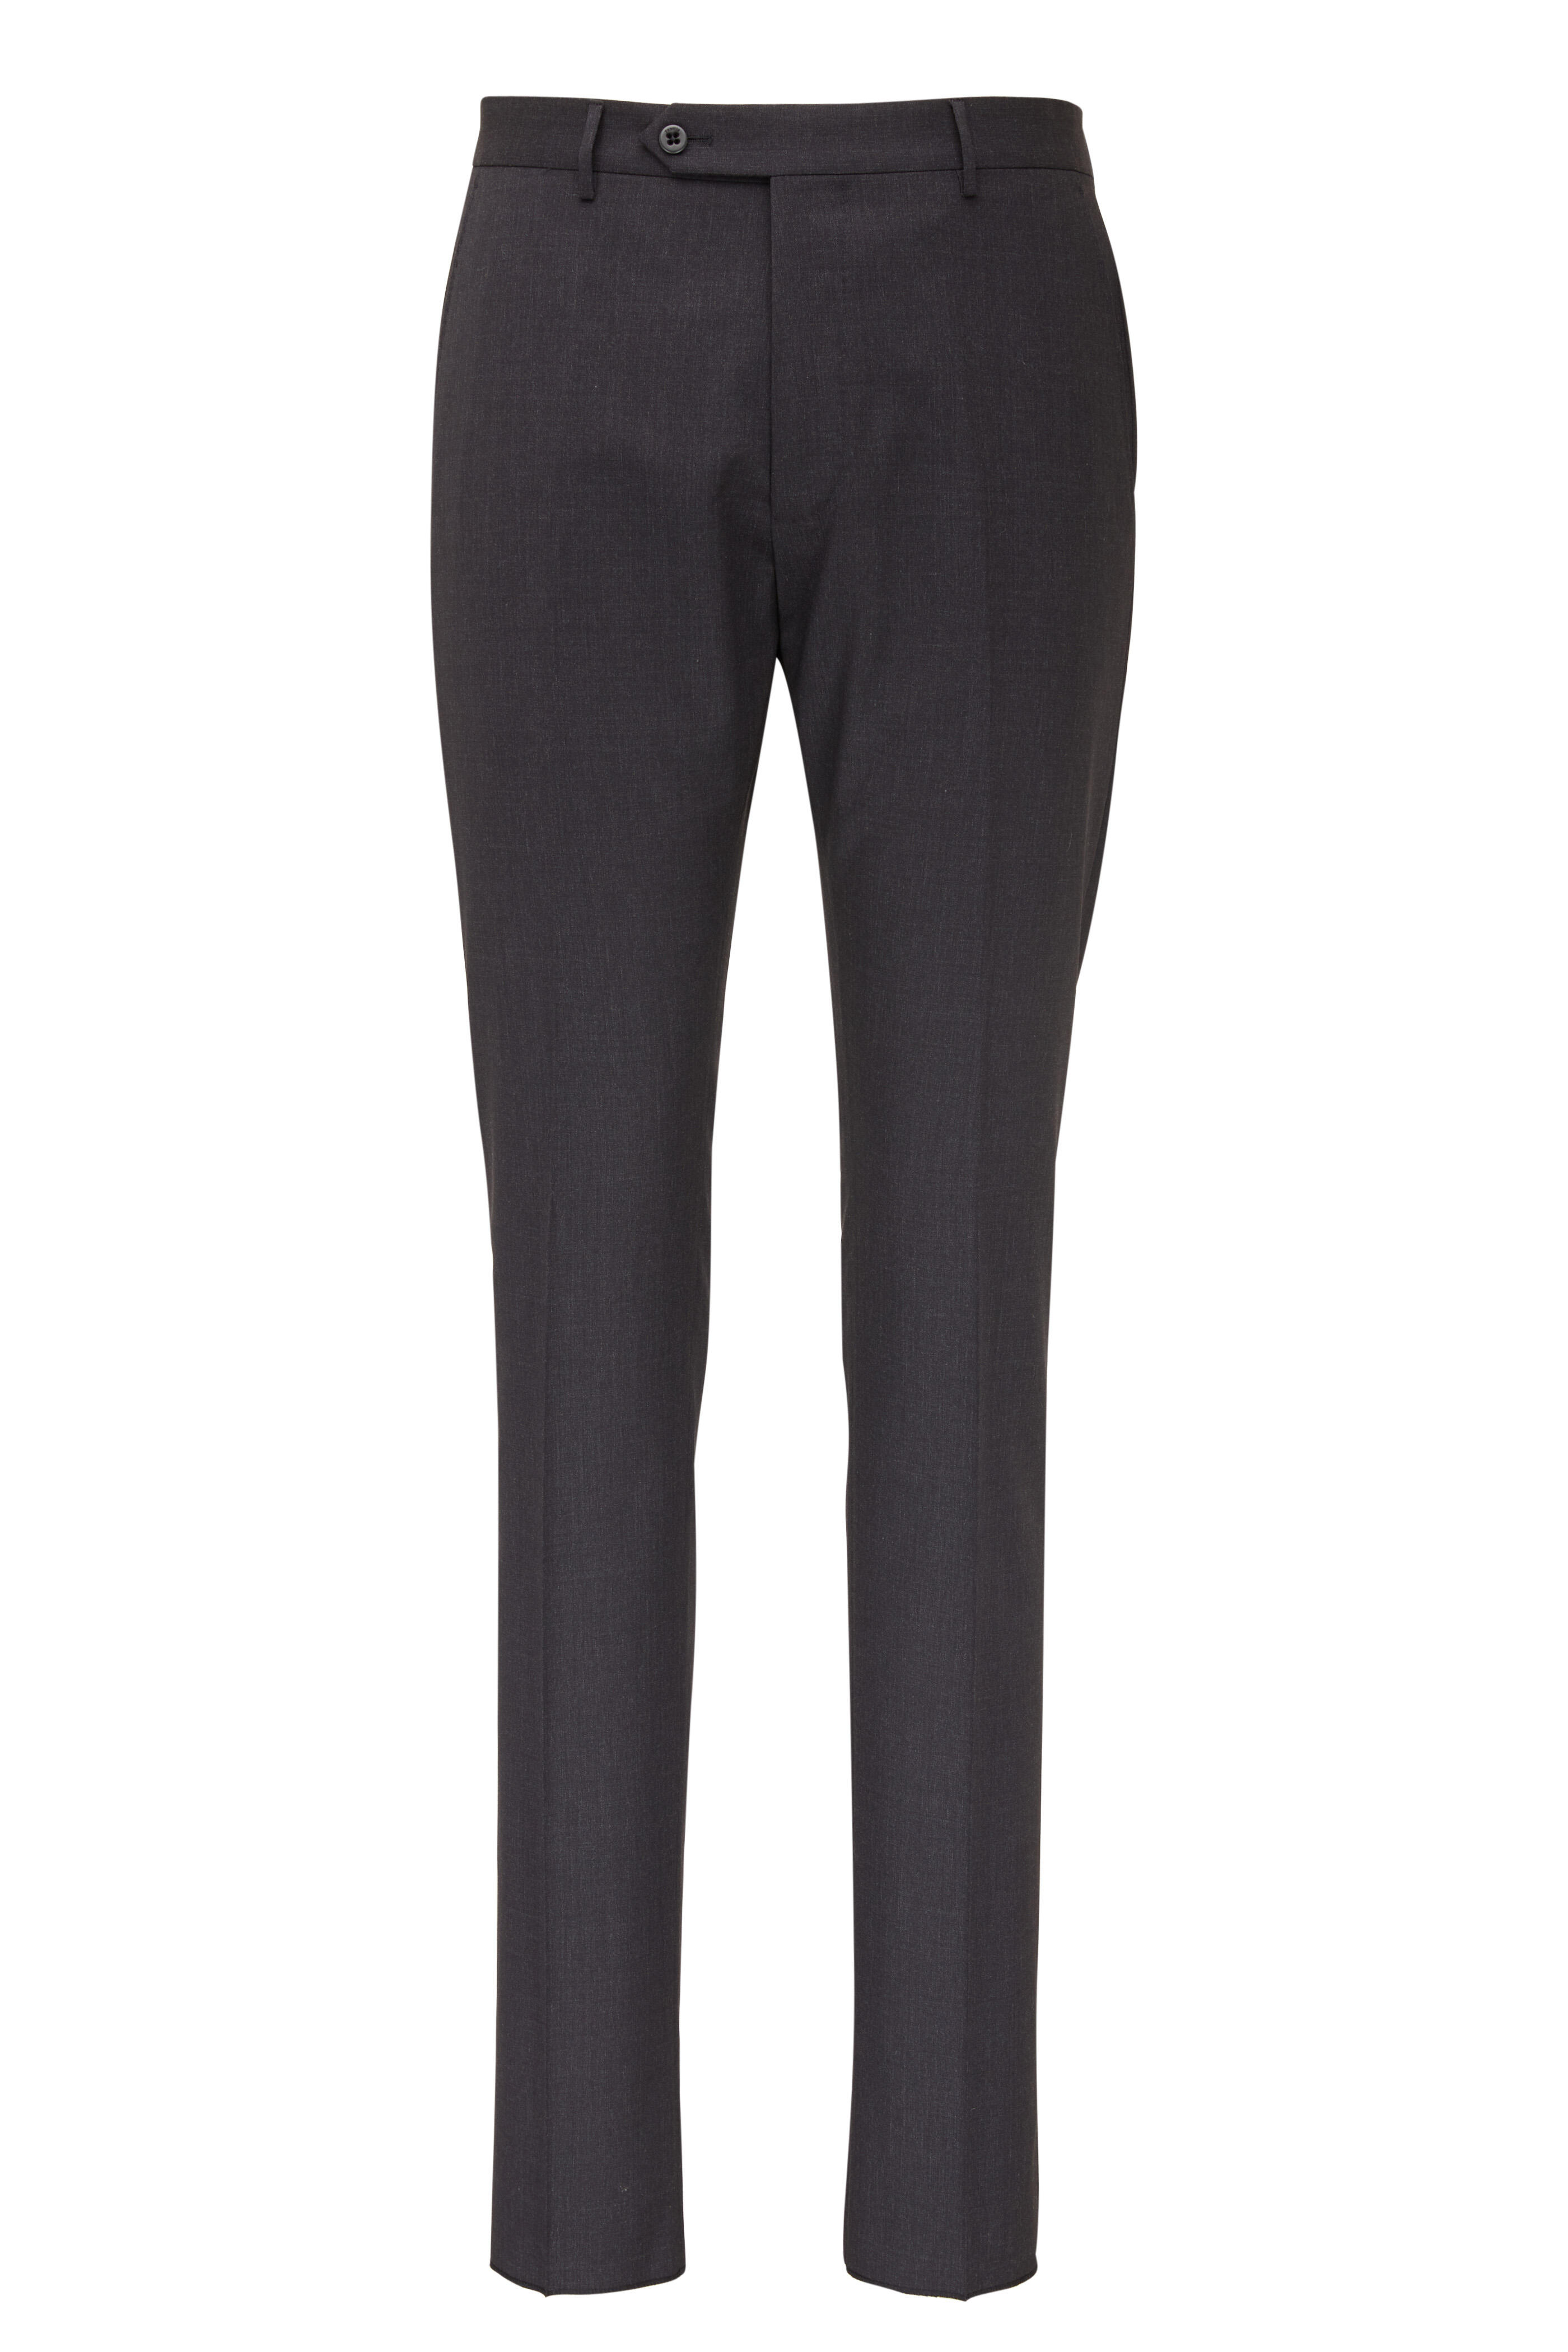 Zanella - Charcoal Wool Solid Stretch Pants | Mitchell Stores